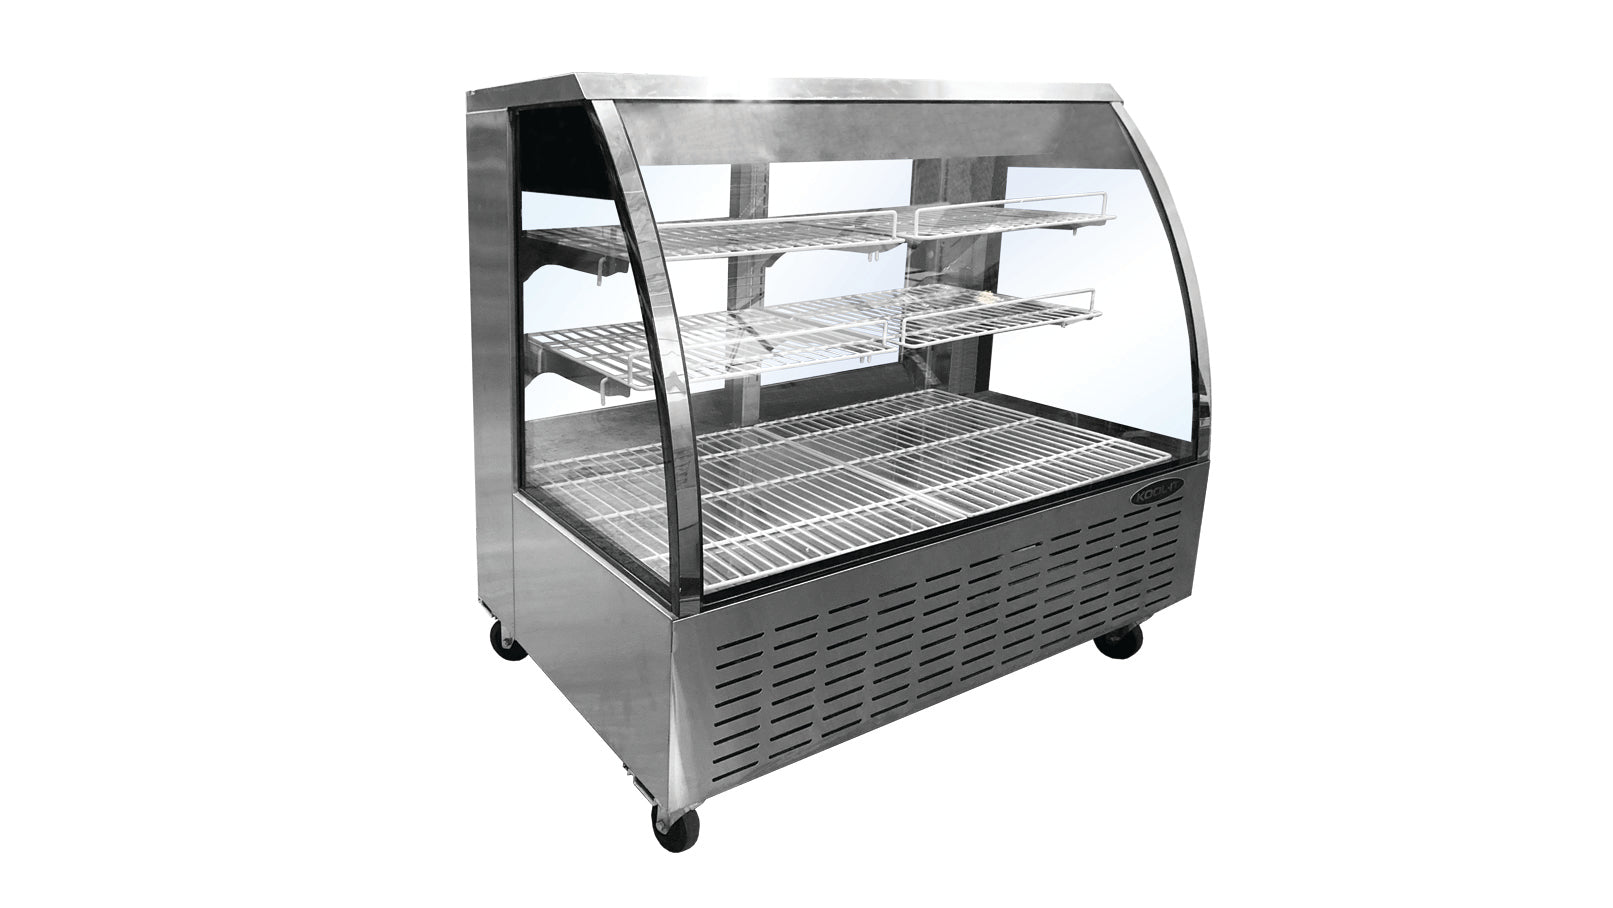 Kool-It - KDG-36, 36" Curved Glass Deli Cases With 12 cu.ft Capacity